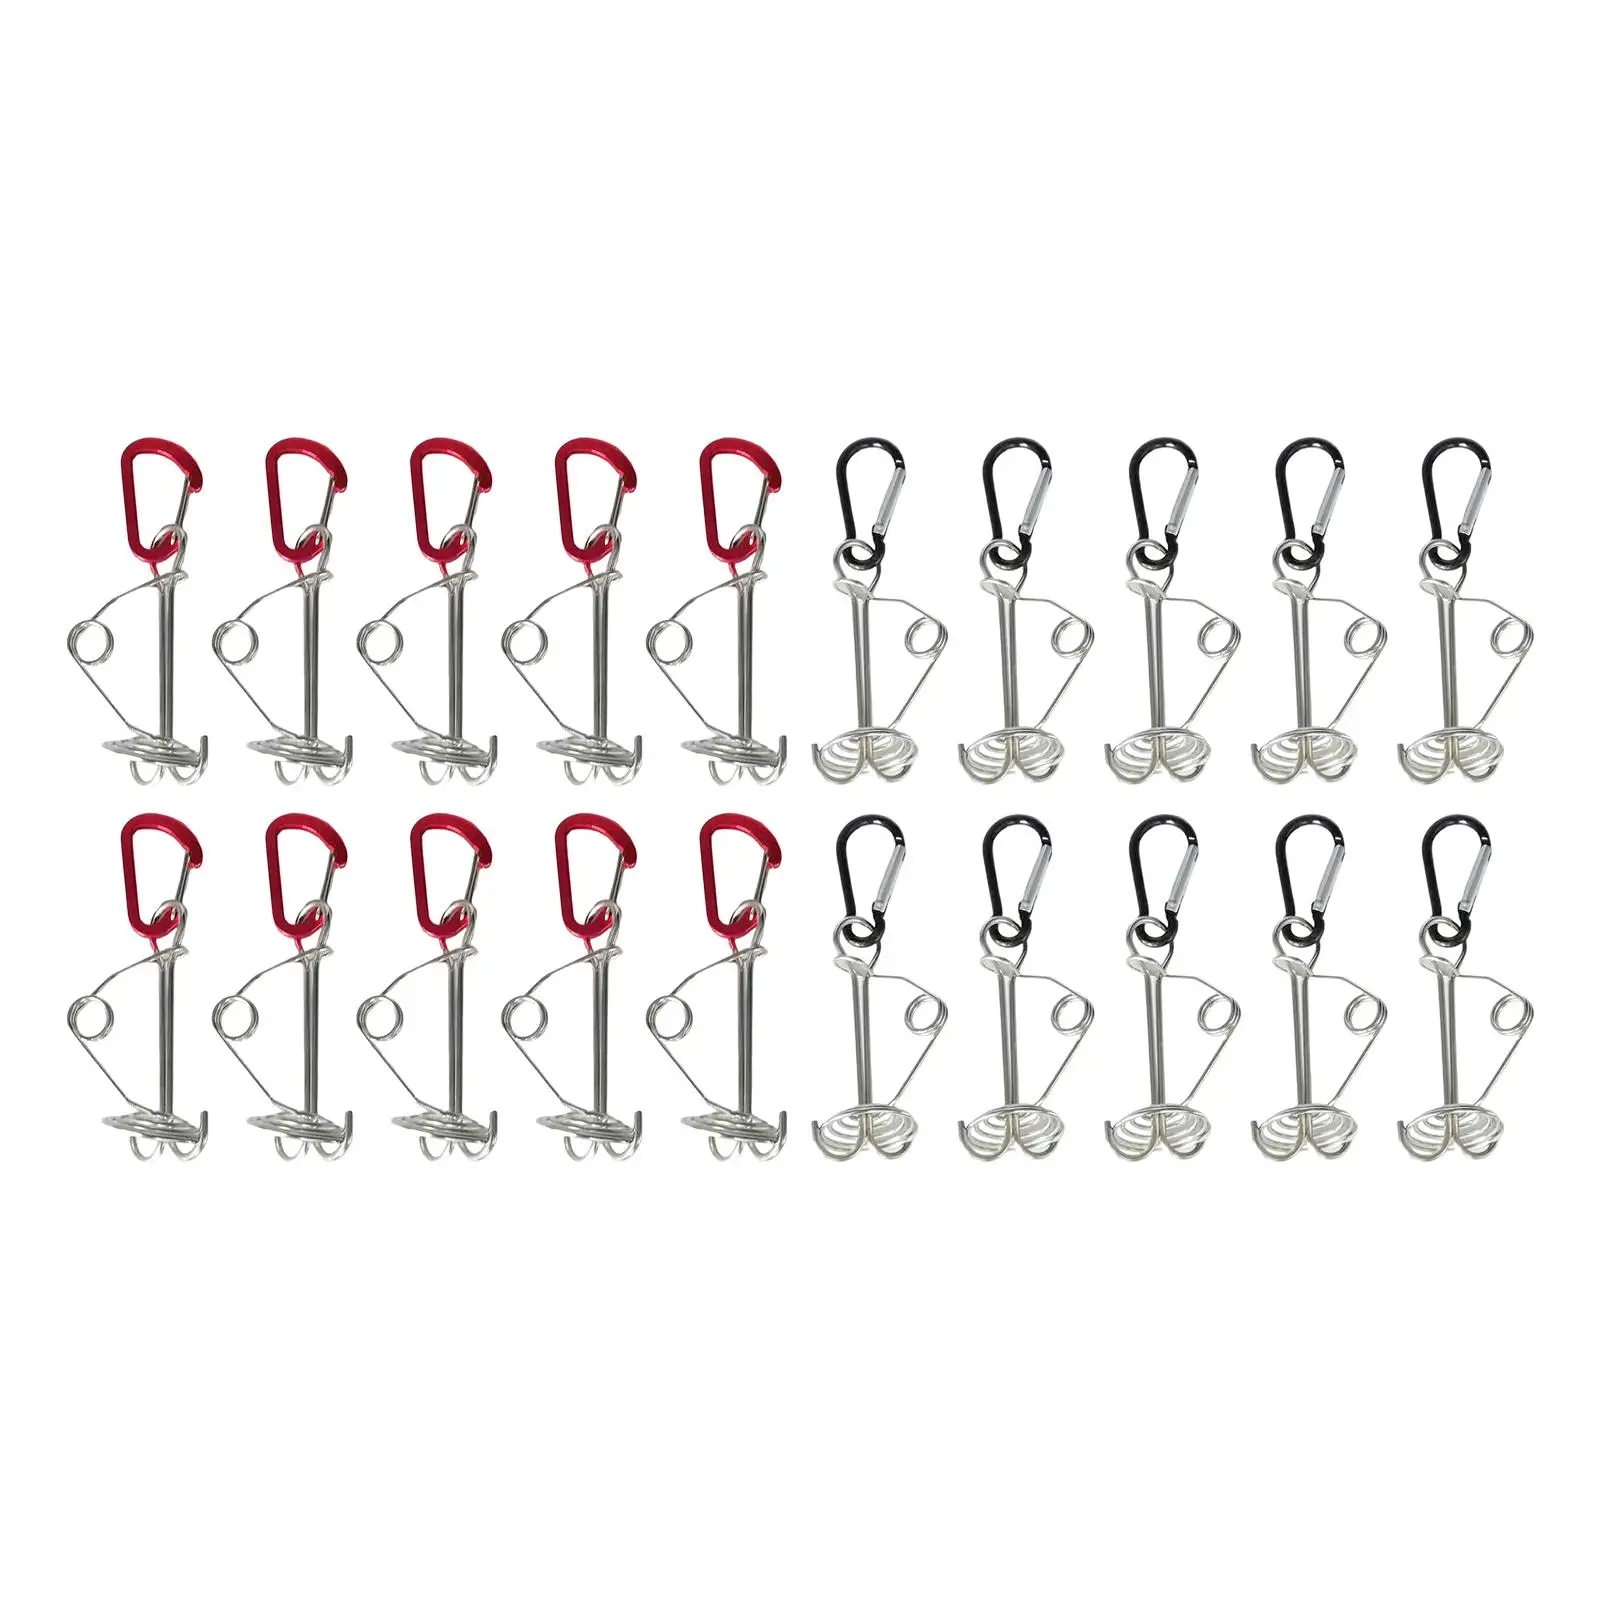 10 Anchor Peg with Spring Buckle Steel Awning Tool Windproof Tent Stakes Adjuster Carabiner Clips for Hiking Gallery Road  